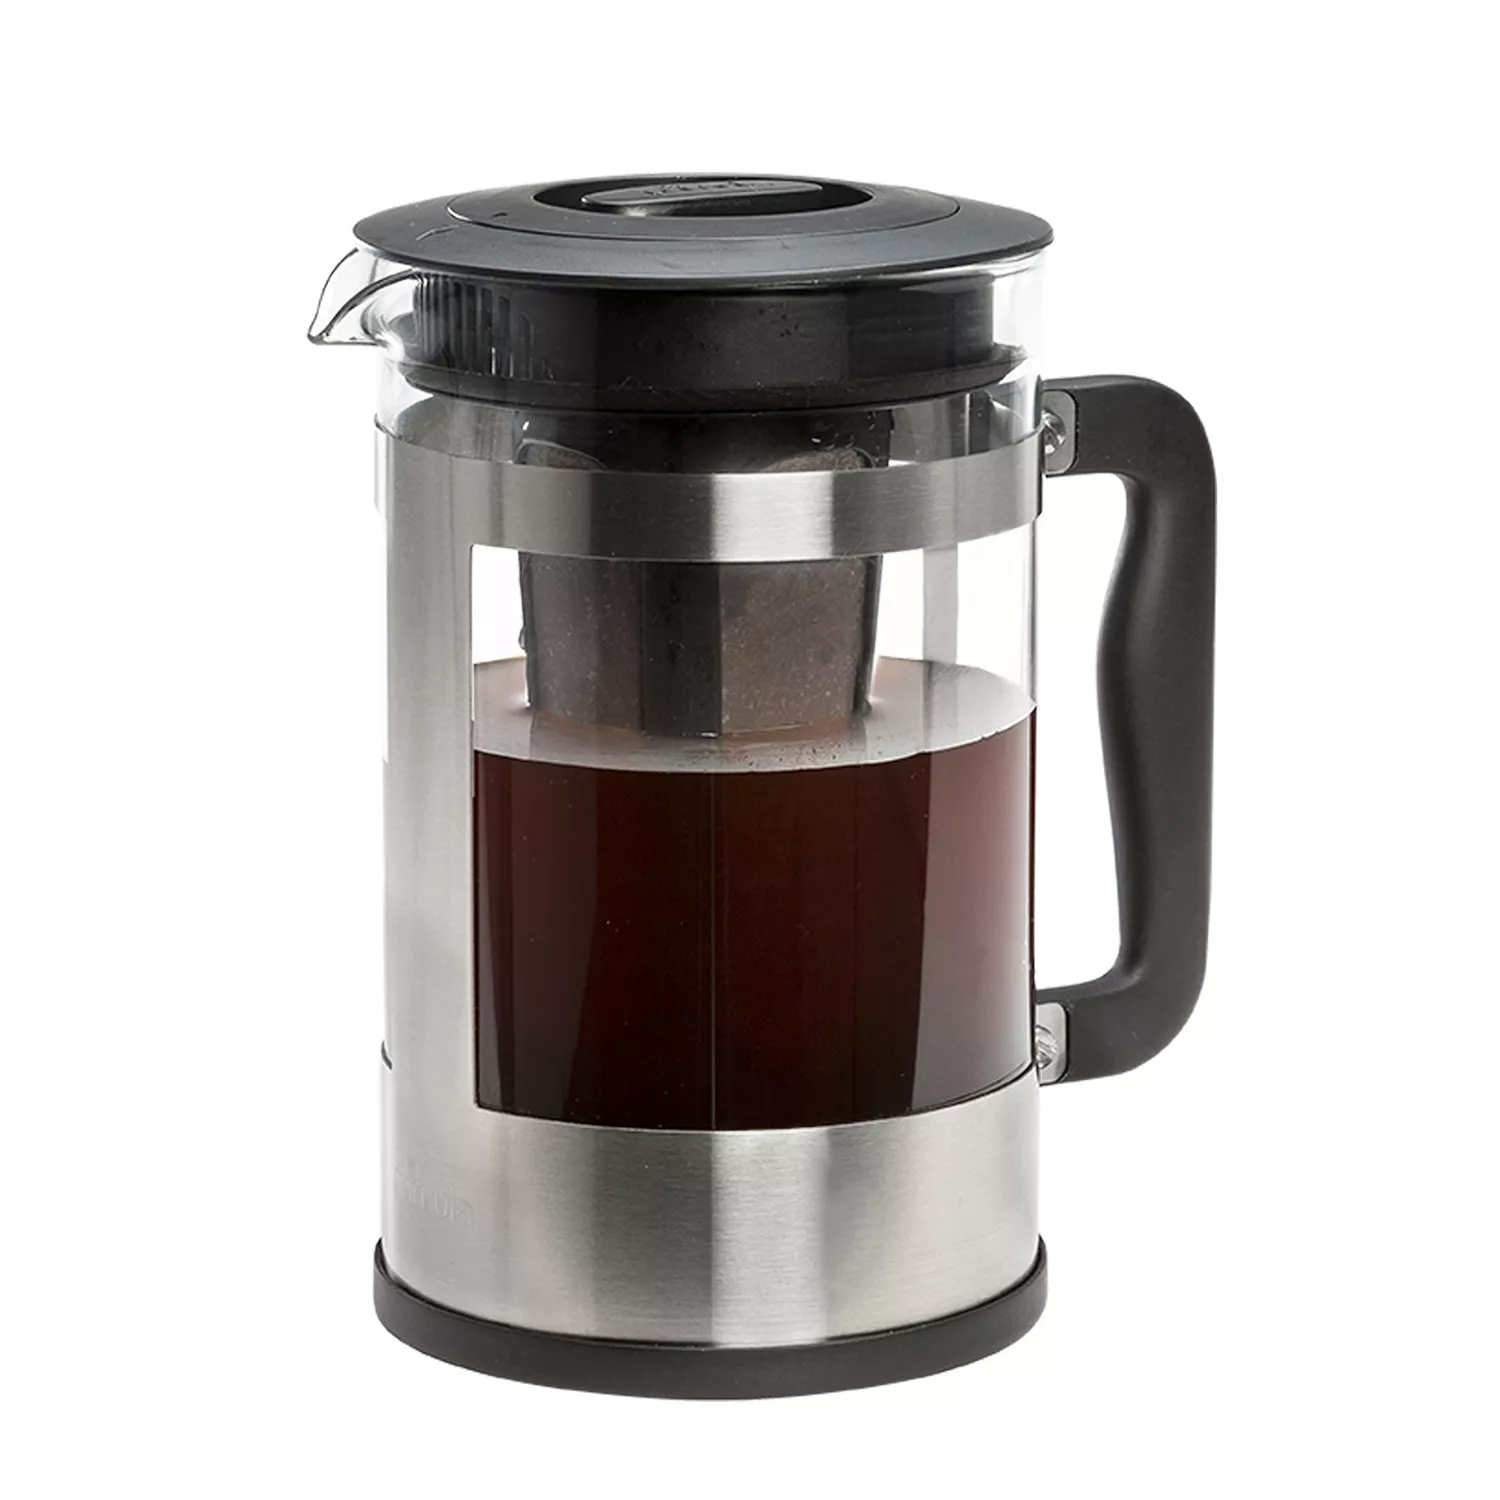 Today's everyday useful gadget is the KitchenAid Cold Brew Maker. As a